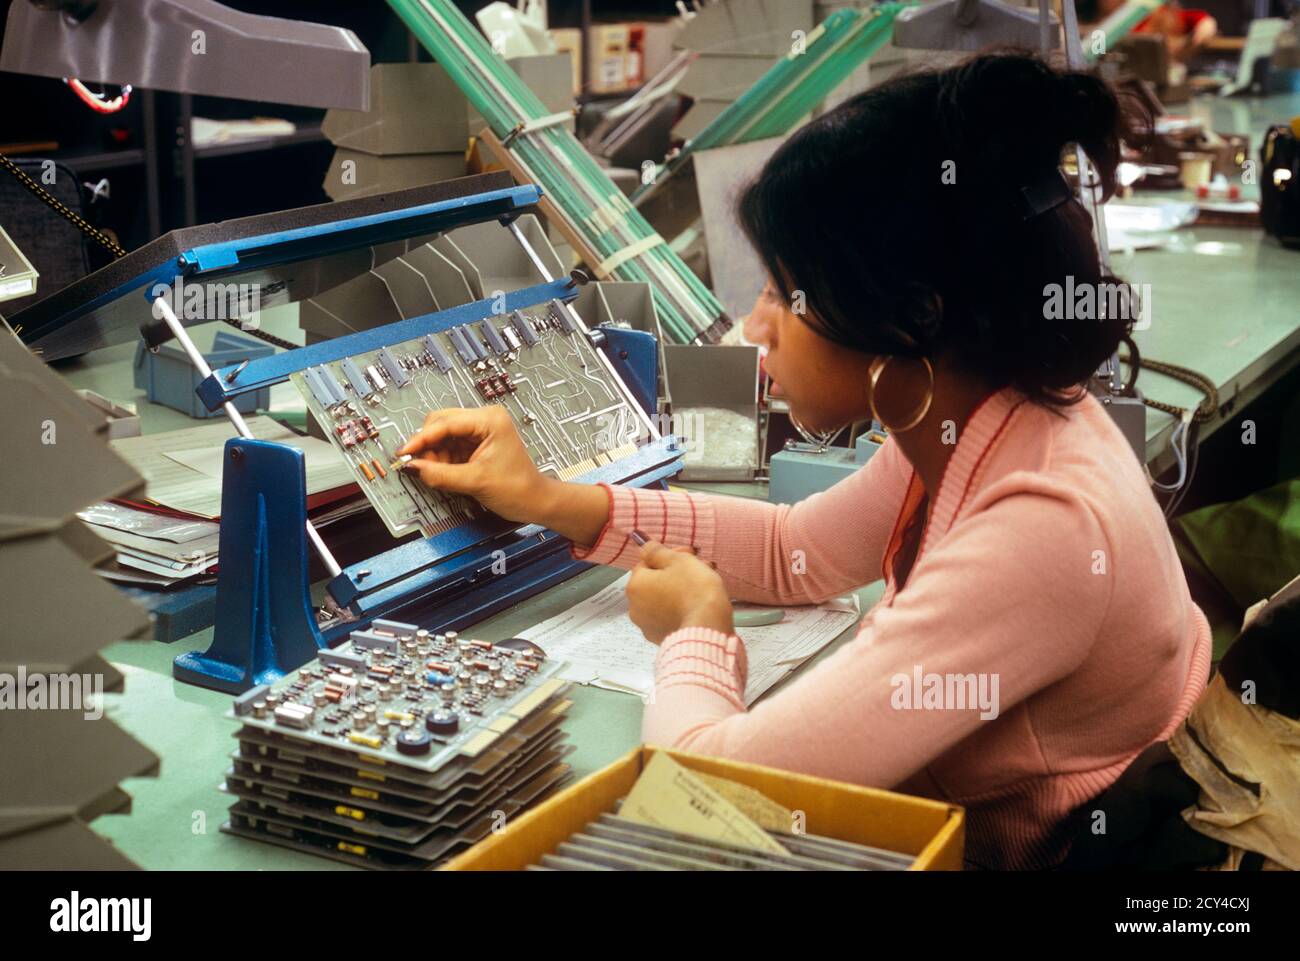 1970s SINGLE AFRICAN-AMERICAN WOMAN WORKER ASSEMBLING COMPUTER CIRCUIT BOARD IN FACTORY IN PENNSYLVANIA USA - ki4088 HAR001 HARS HEALTHINESS UNITED STATES HALF-LENGTH LADIES COMPUTERS PERSONS UNITED STATES OF AMERICA PROFESSION NORTH AMERICA NORTH AMERICAN SKILL OCCUPATION SKILLS WELLNESS HEAD AND SHOULDERS AFRICAN-AMERICANS AFRICAN-AMERICAN CAREERS PA ASSEMBLING BLACK ETHNICITY LABOR PRIDE IN EMPLOYMENT OCCUPATIONS HIGH TECH CONCEPTUAL EMPLOYEE CIRCUIT PRECISION YOUNG ADULT WOMAN COMPUTING HAR001 LABORING OLD FASHIONED AFRICAN AMERICANS Stock Photo